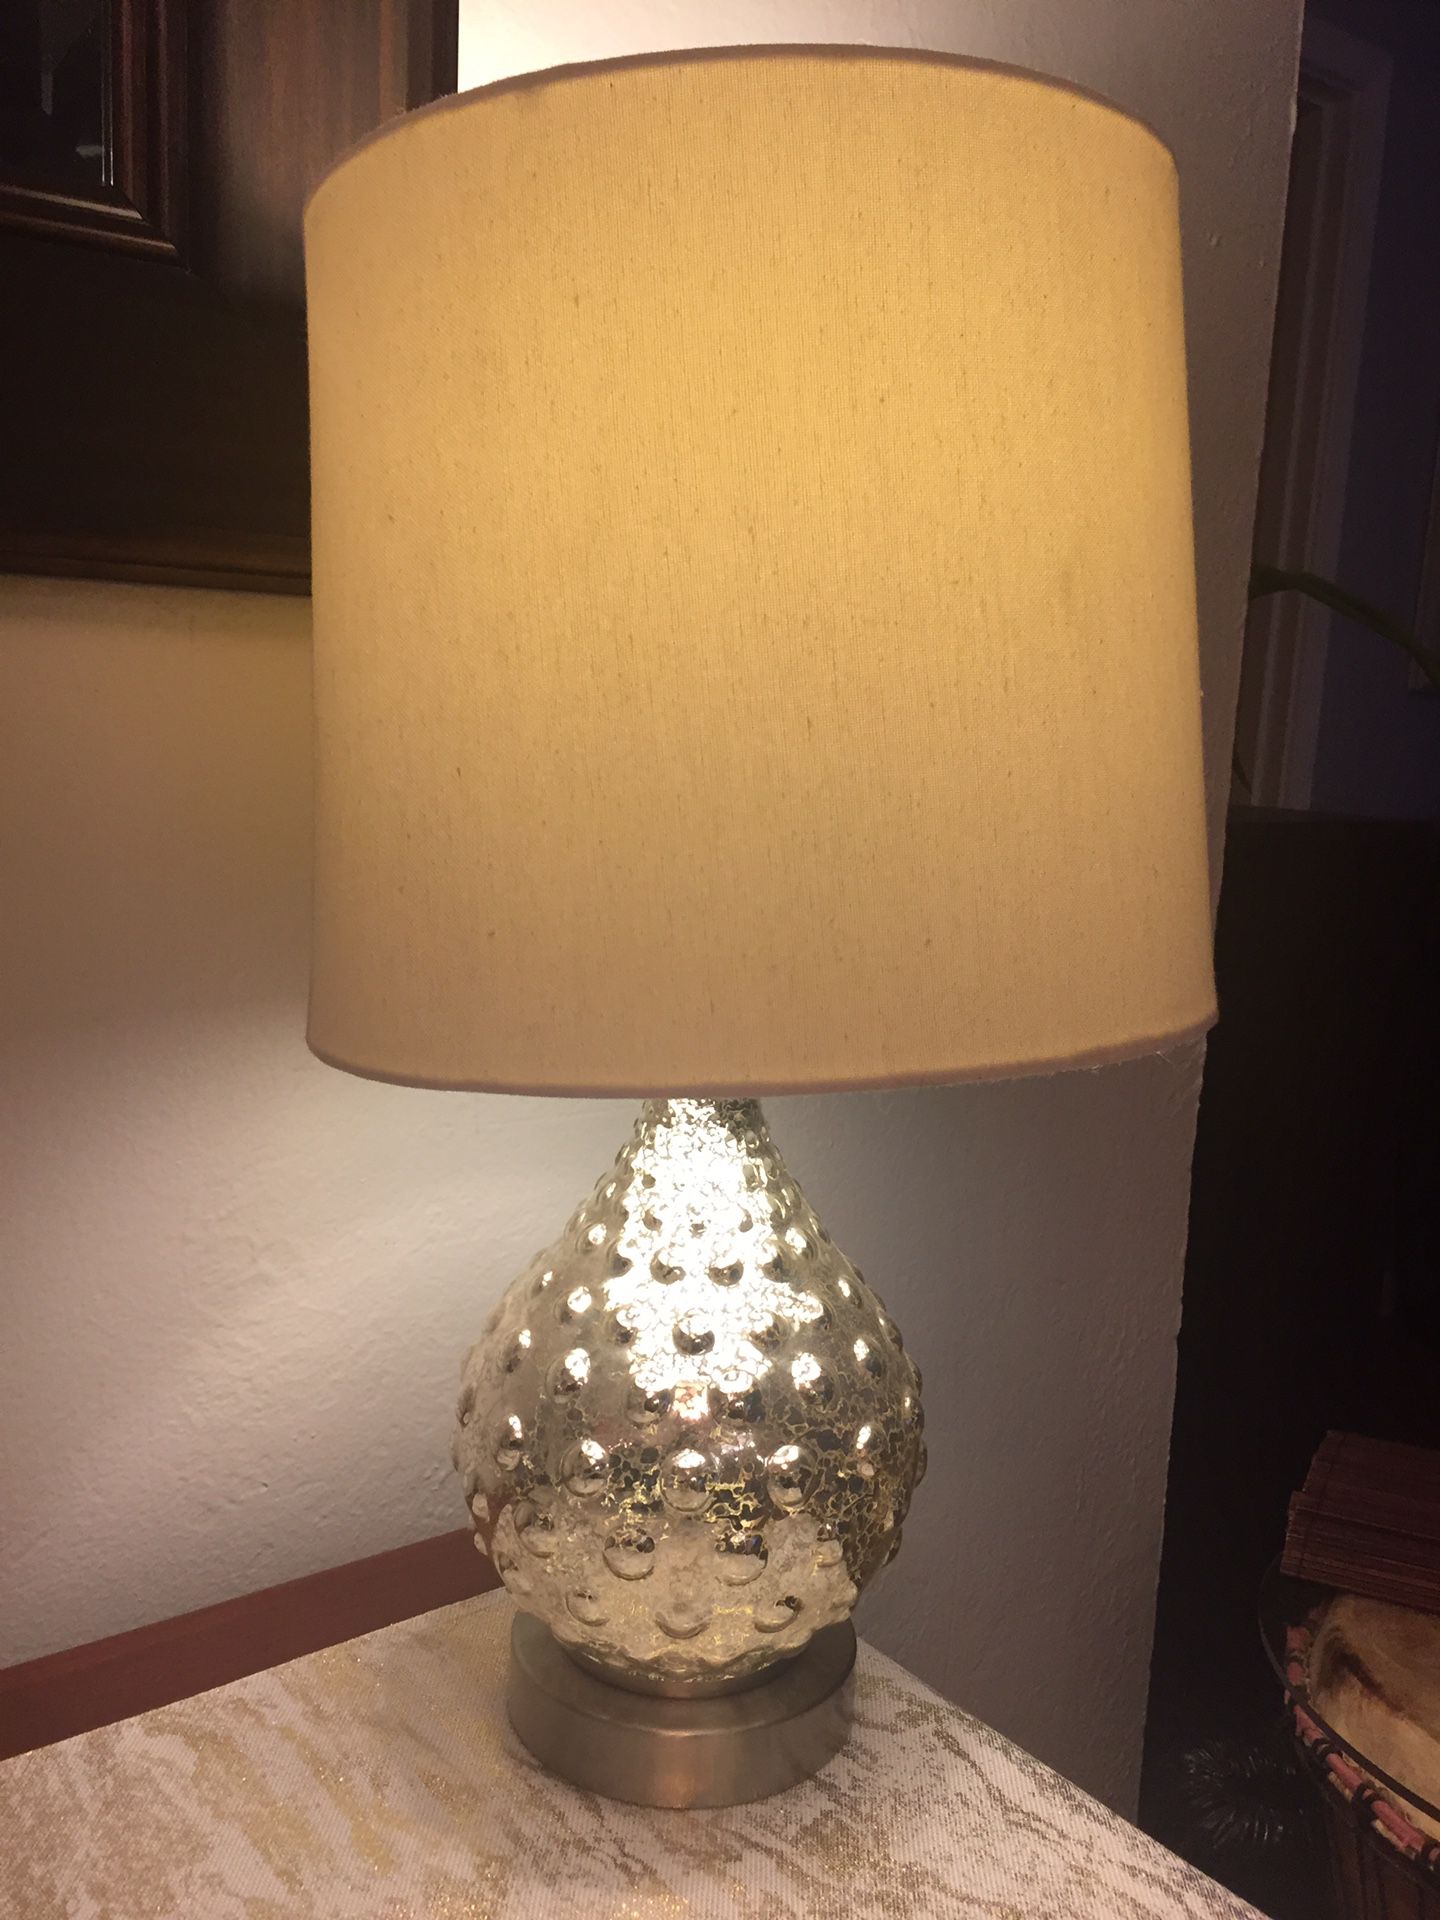 Silver glass lamp with shade and bulb